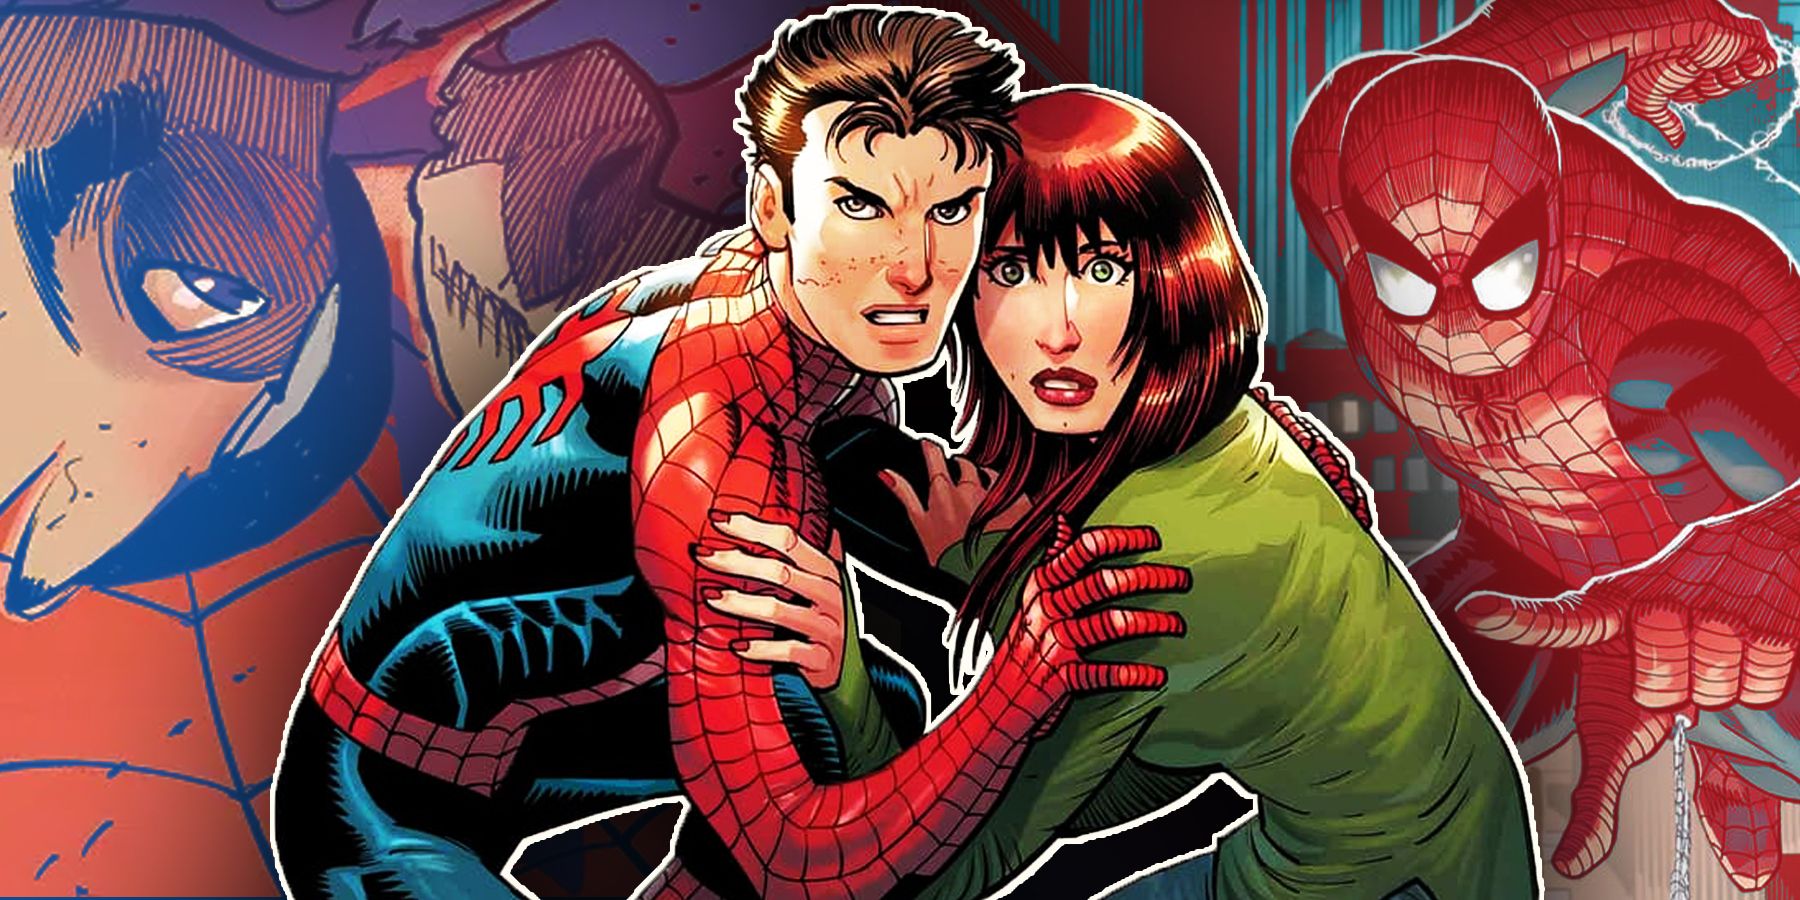 Composite of Peter Parker/ Spider-Man and Mary Jane from Zeb Wells' Amazing Spider-Man comics